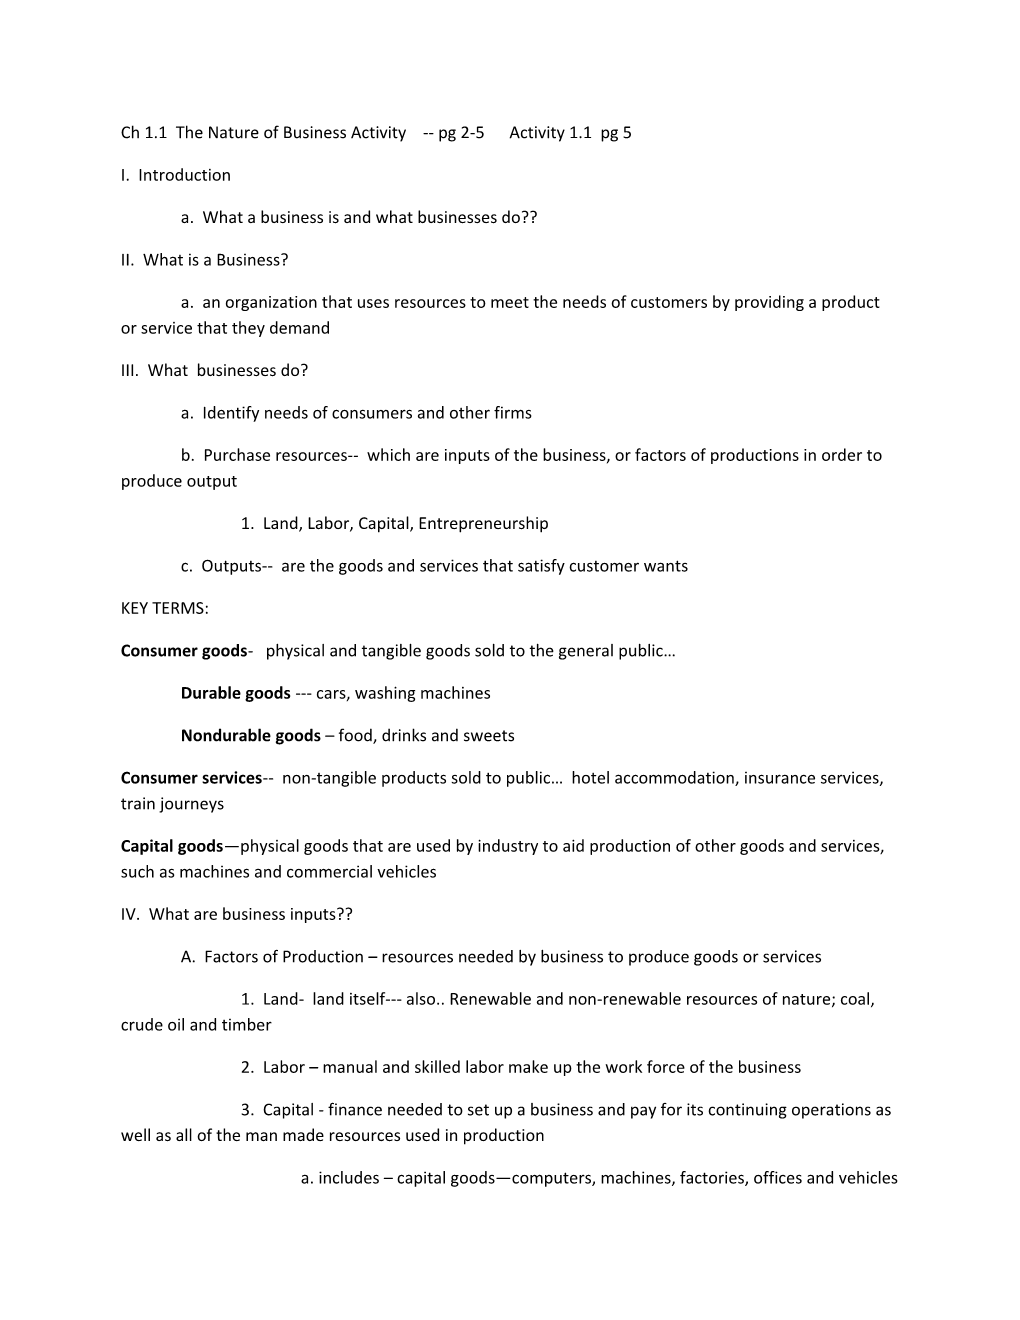 Ch 1.1 the Nature of Business Activity Pg 2-5 Activity 1.1 Pg 5